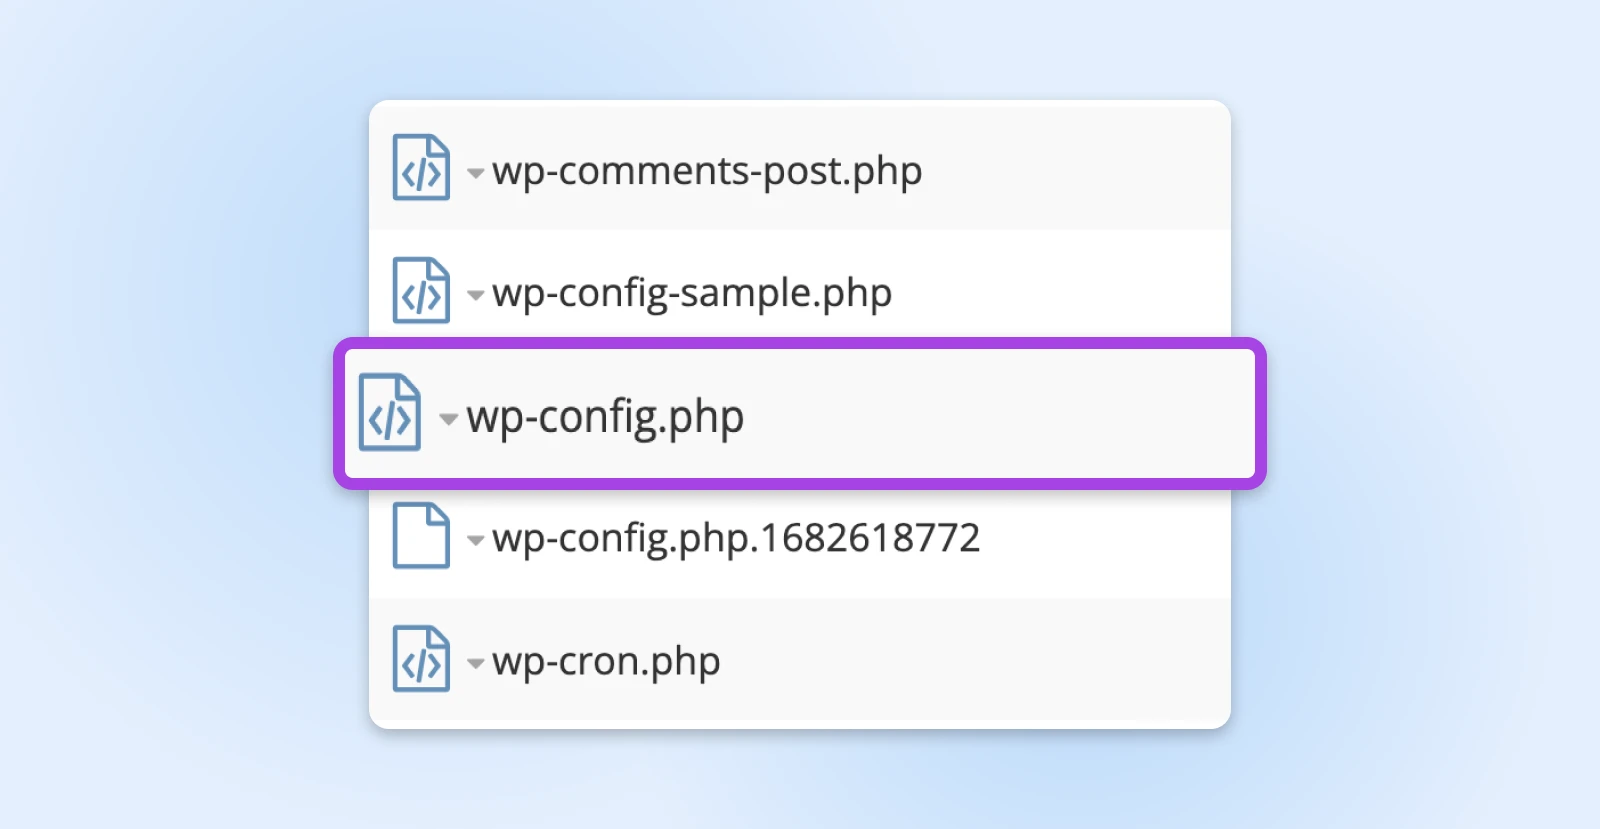 wp-config.php file in the root directory